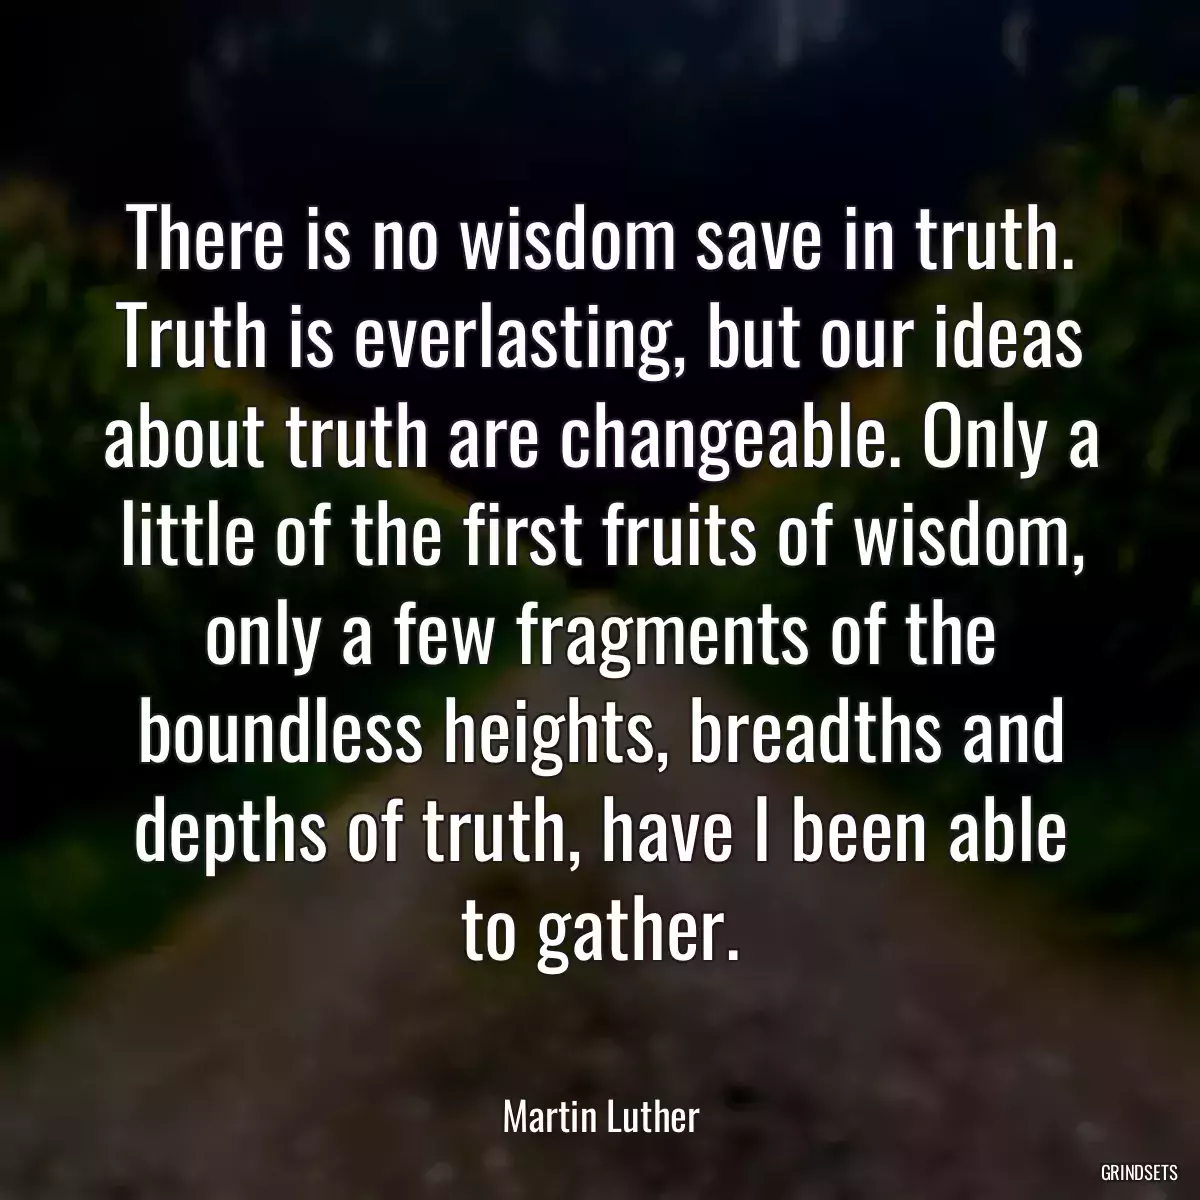 There is no wisdom save in truth. Truth is everlasting, but our ideas about truth are changeable. Only a little of the first fruits of wisdom, only a few fragments of the boundless heights, breadths and depths of truth, have I been able to gather.